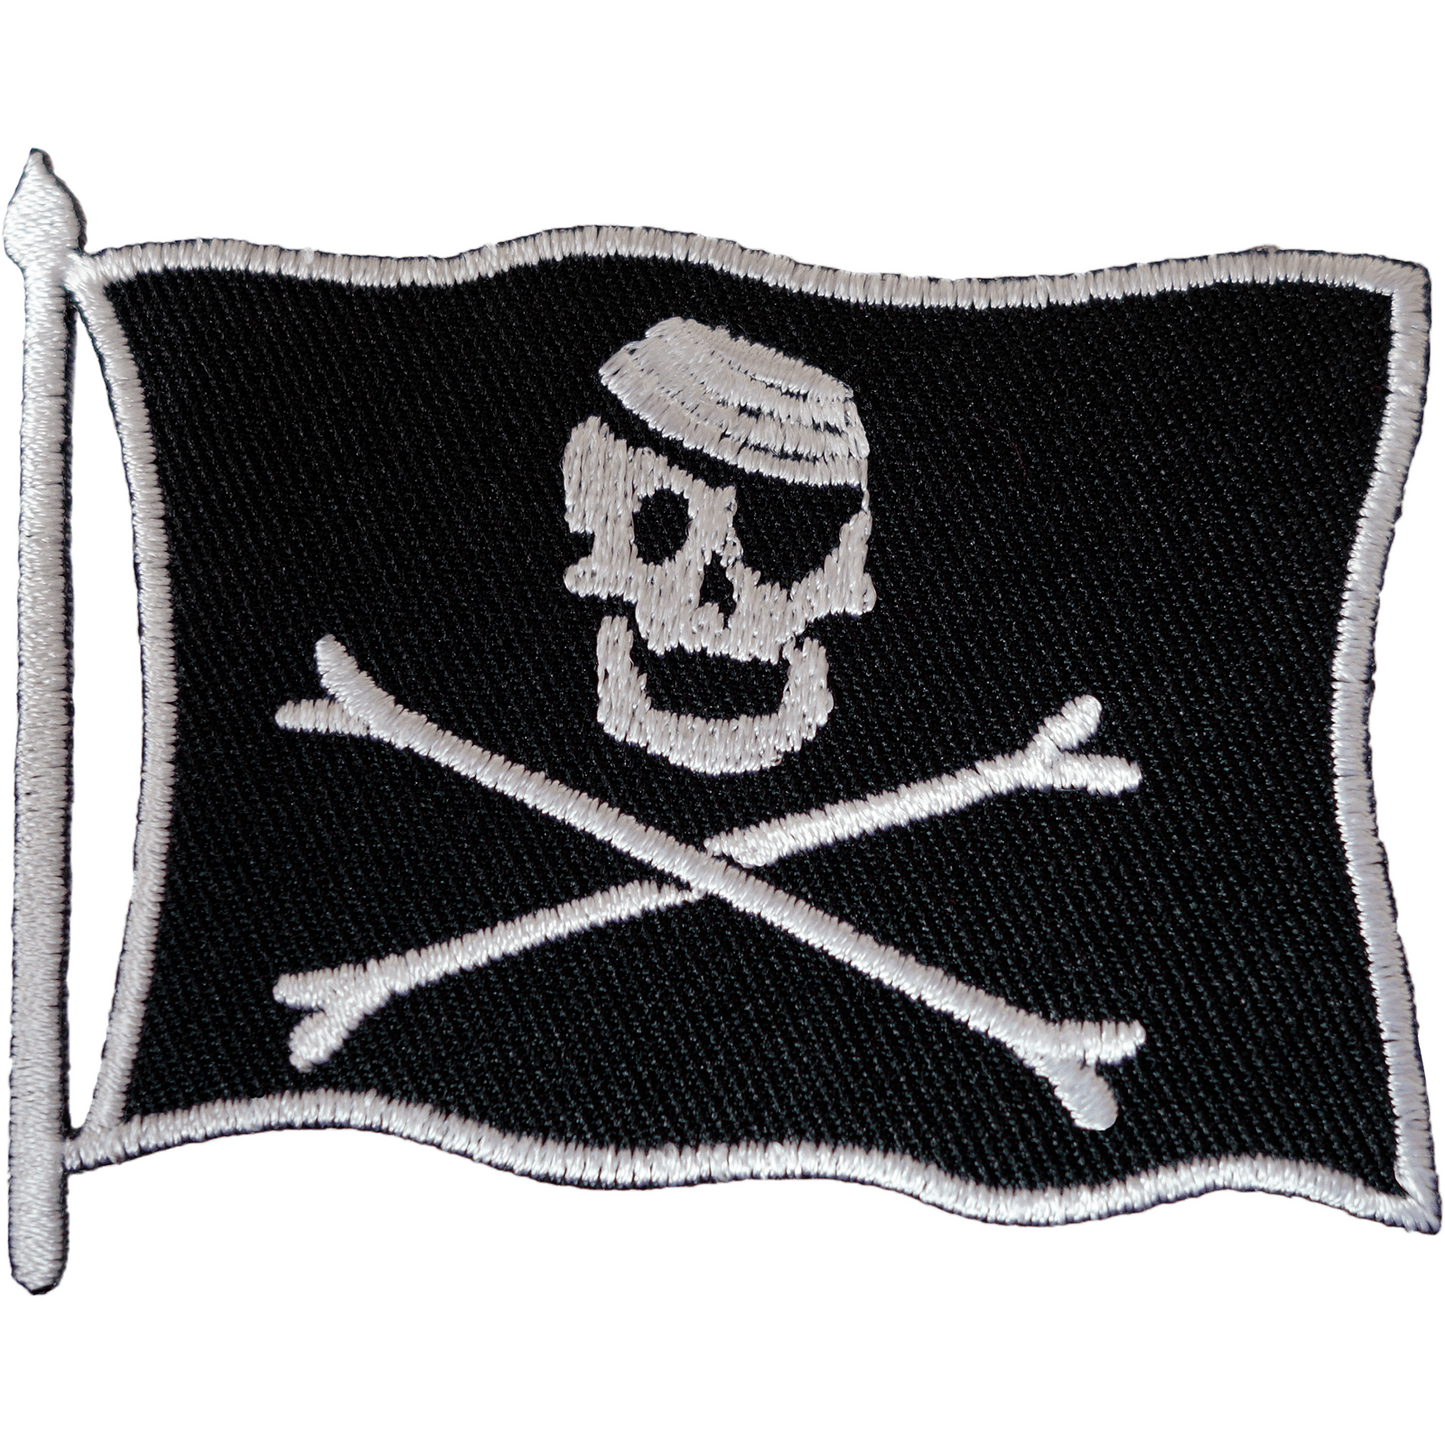 Pirate Flag Patch Iron On Sew On Jolly Roger Jacket Embroidered Motorcycle Badge